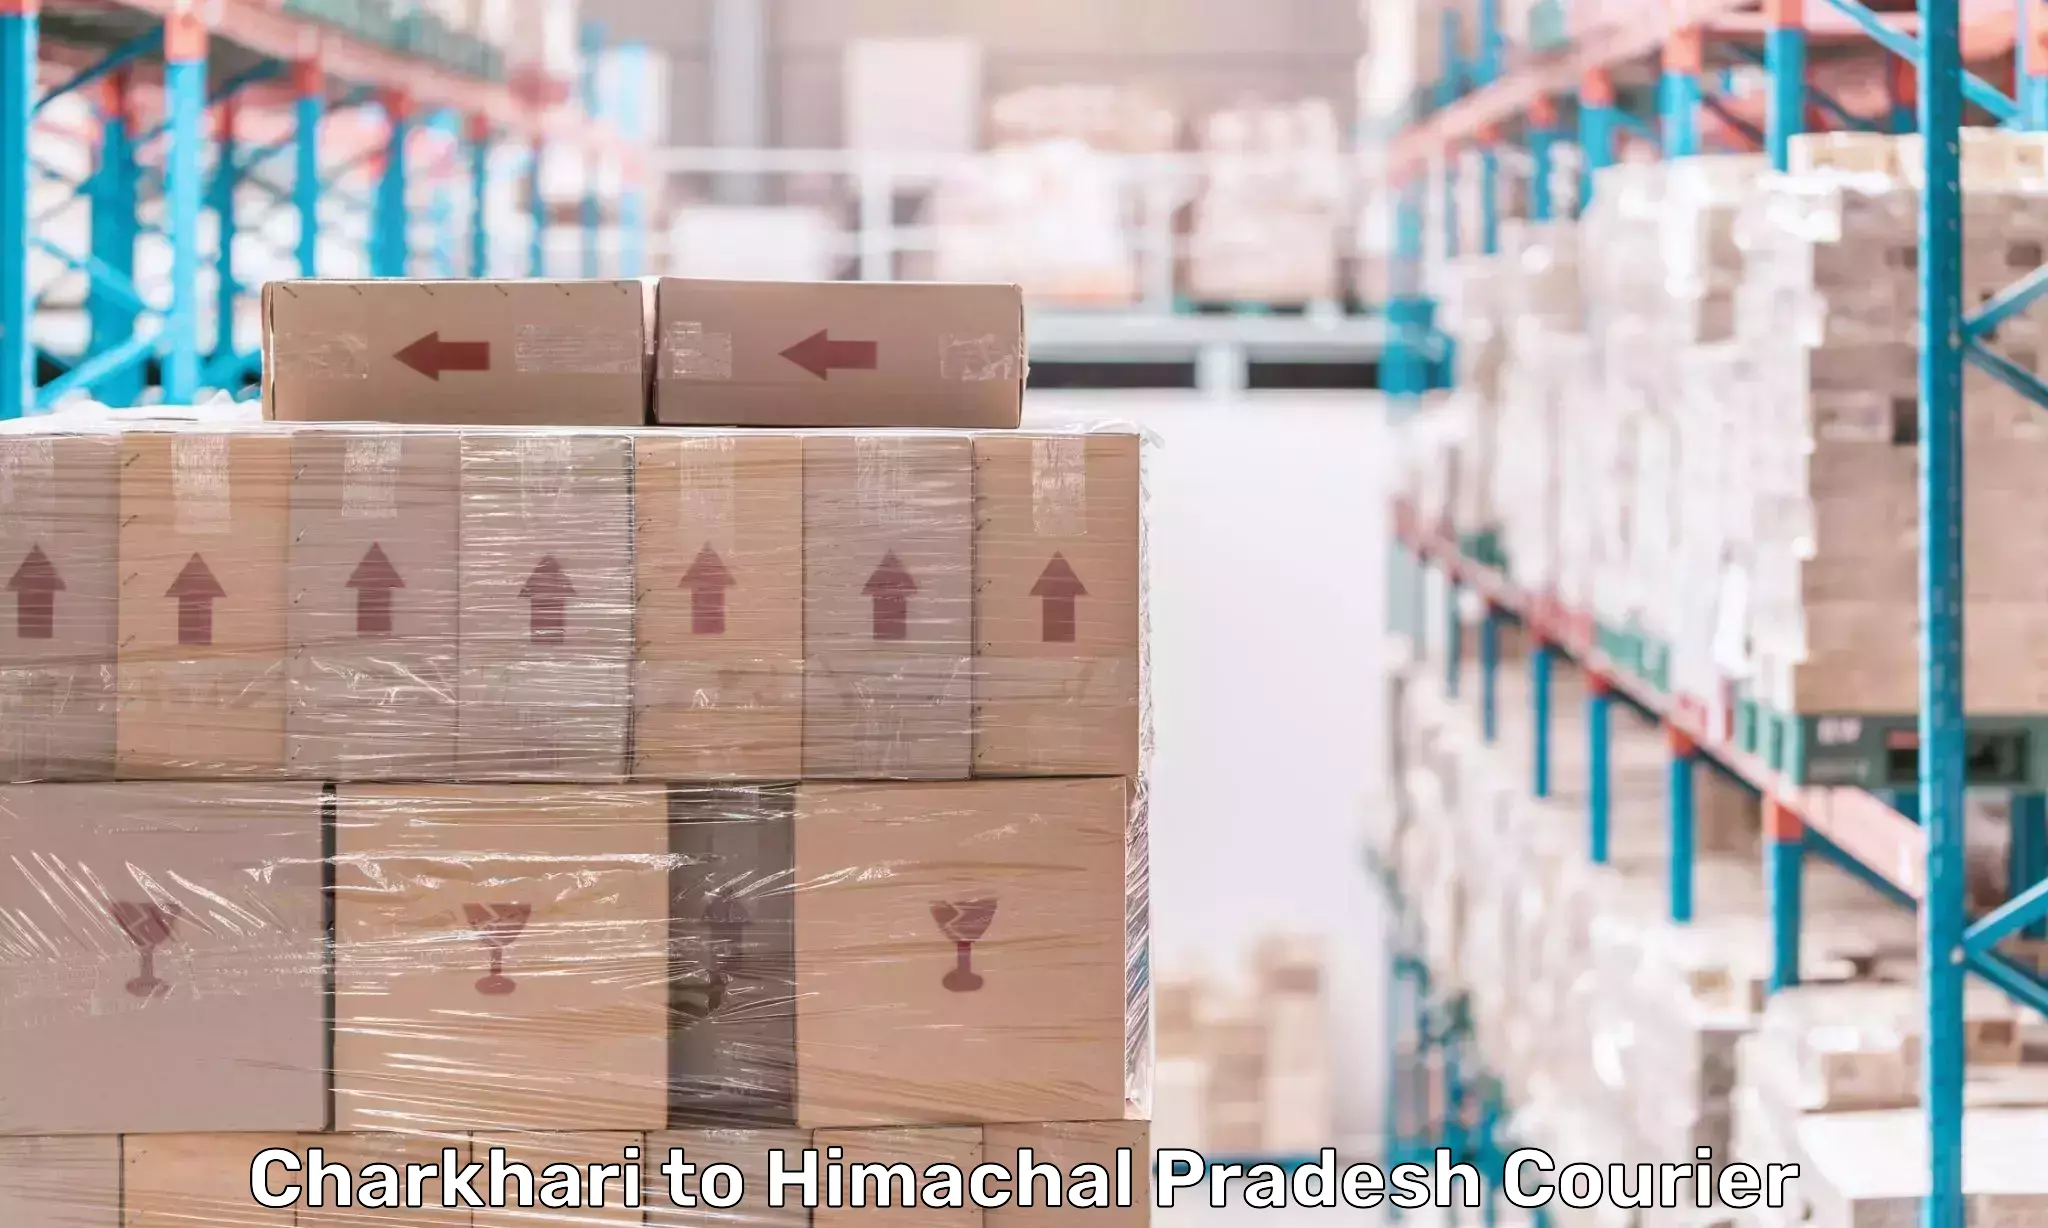 Parcel service for businesses Charkhari to Himachal Pradesh